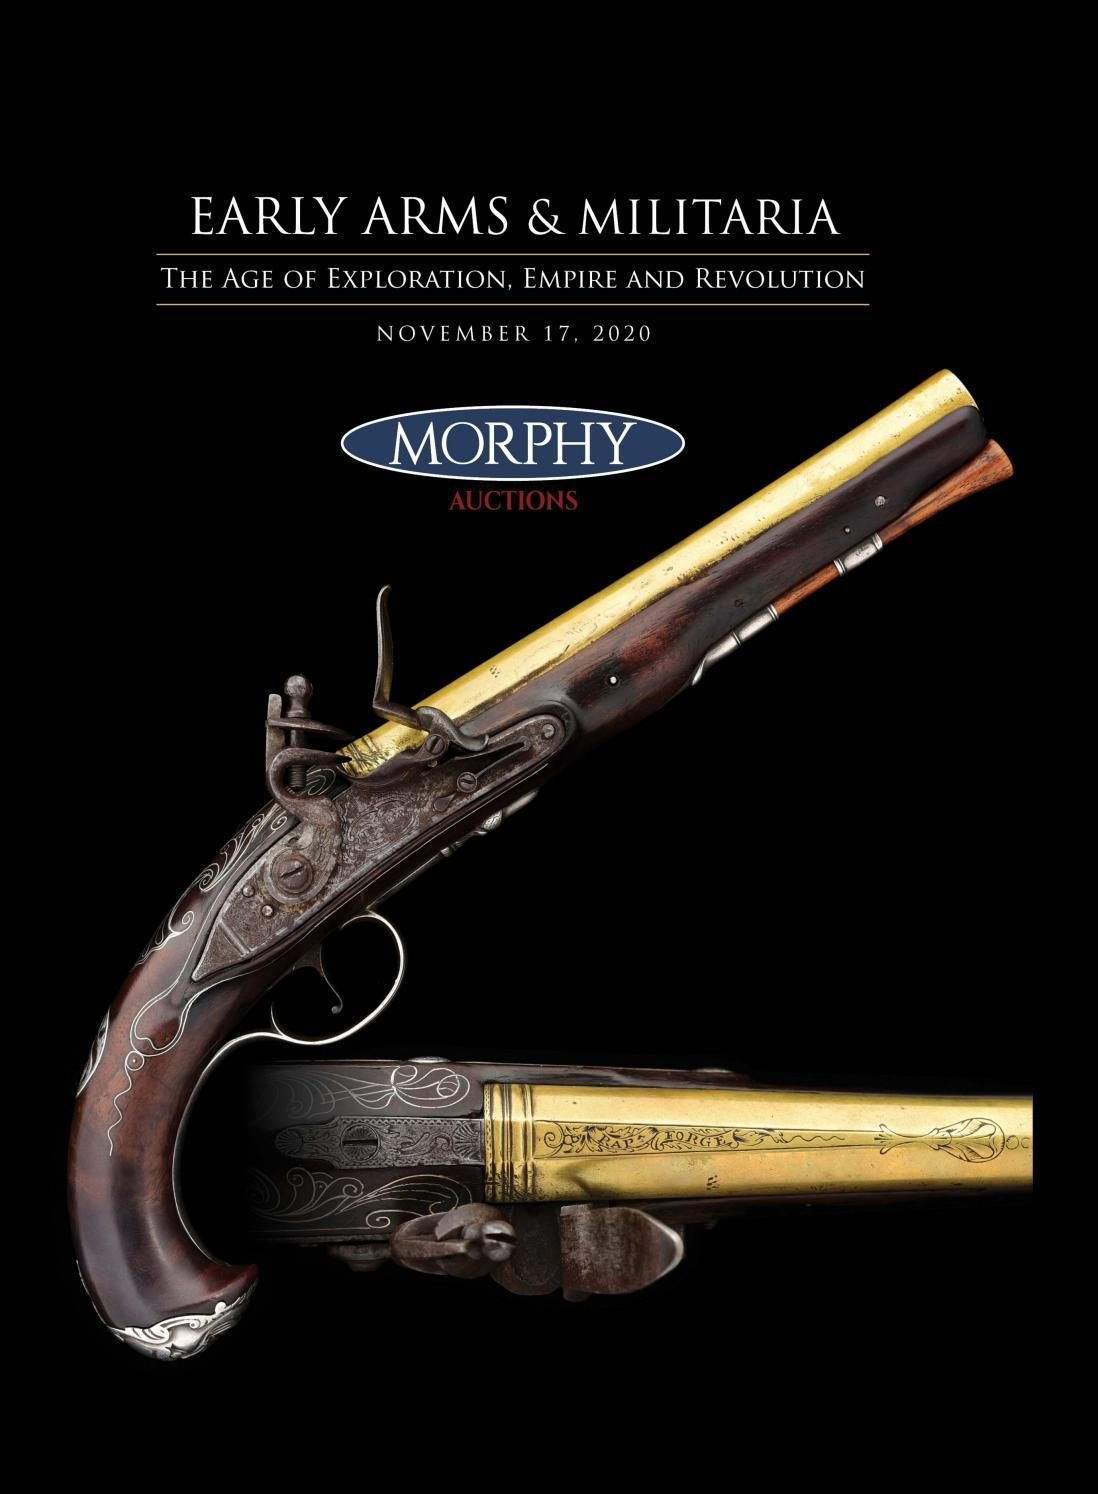 2020 November 17 Early Arms & Militariamorphy Auctions